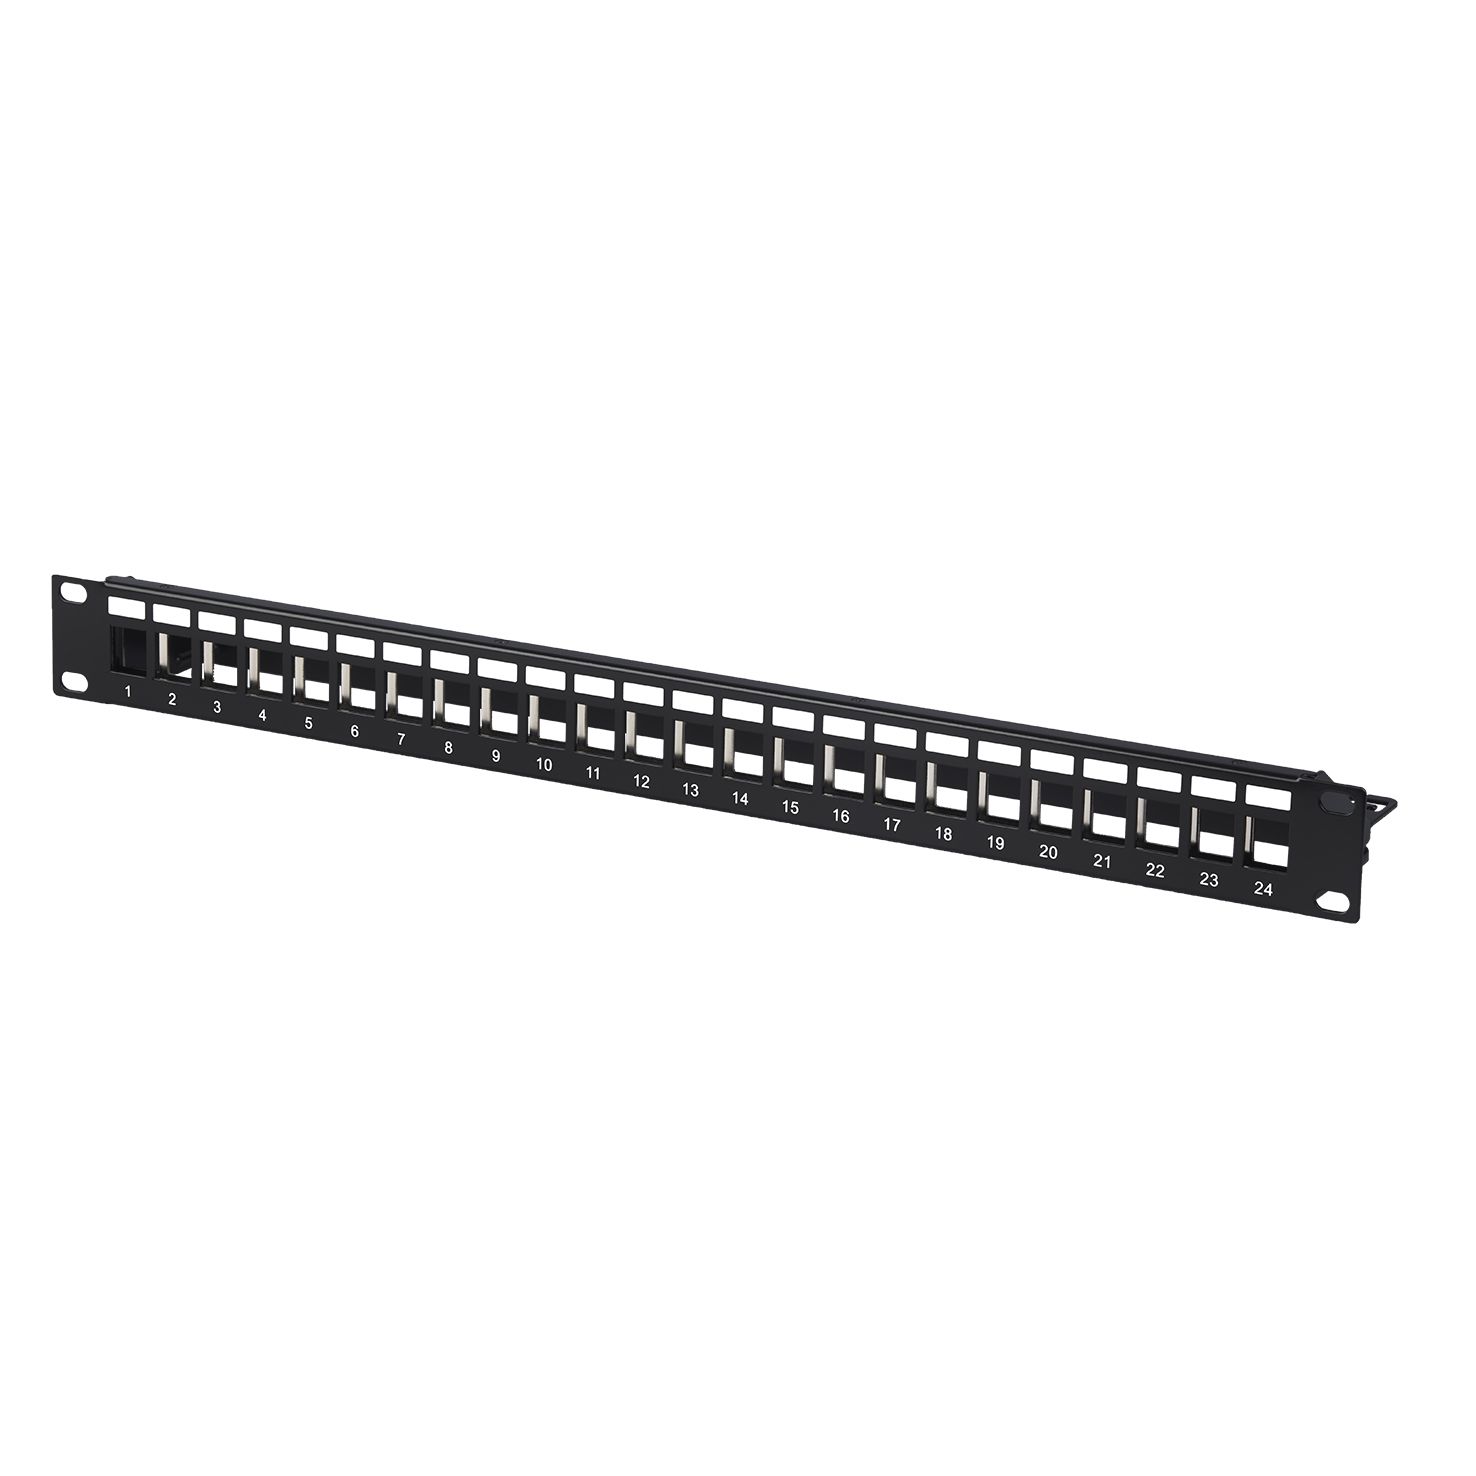 home rj45 patch panel